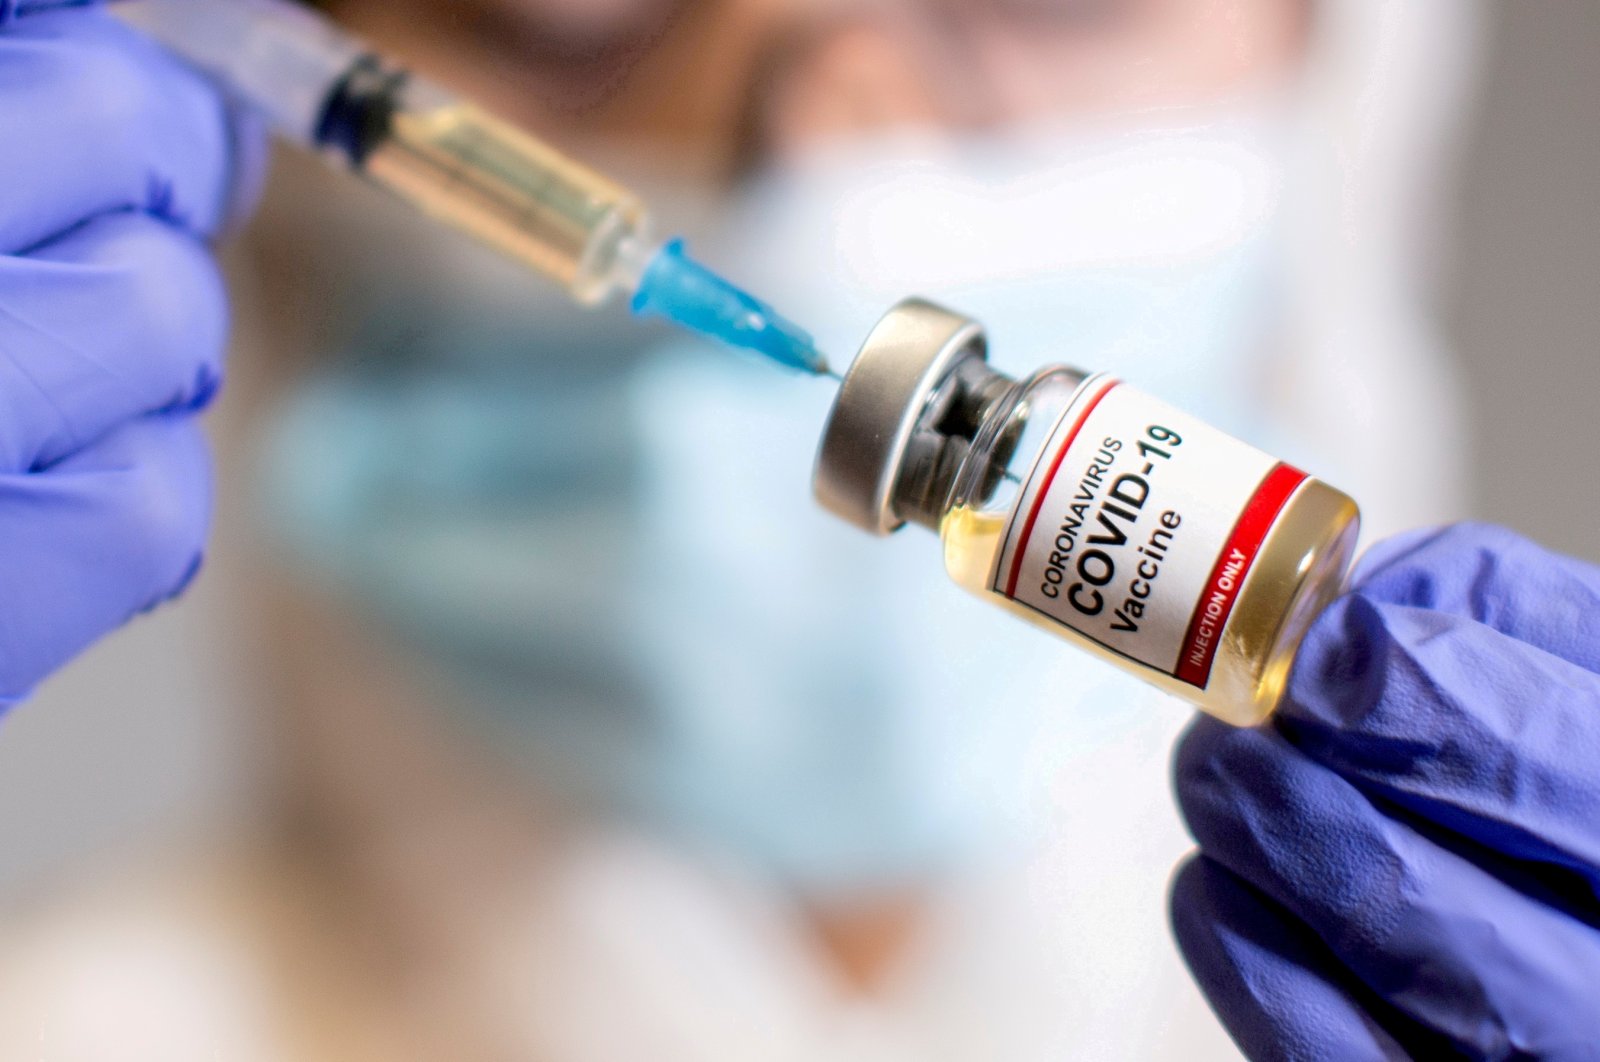 A woman holds a small bottle labelled with a "Coronavirus COVID-19 Vaccine" sticker and a medical syringe, Oct. 30, 2020. (Reuters Photo)